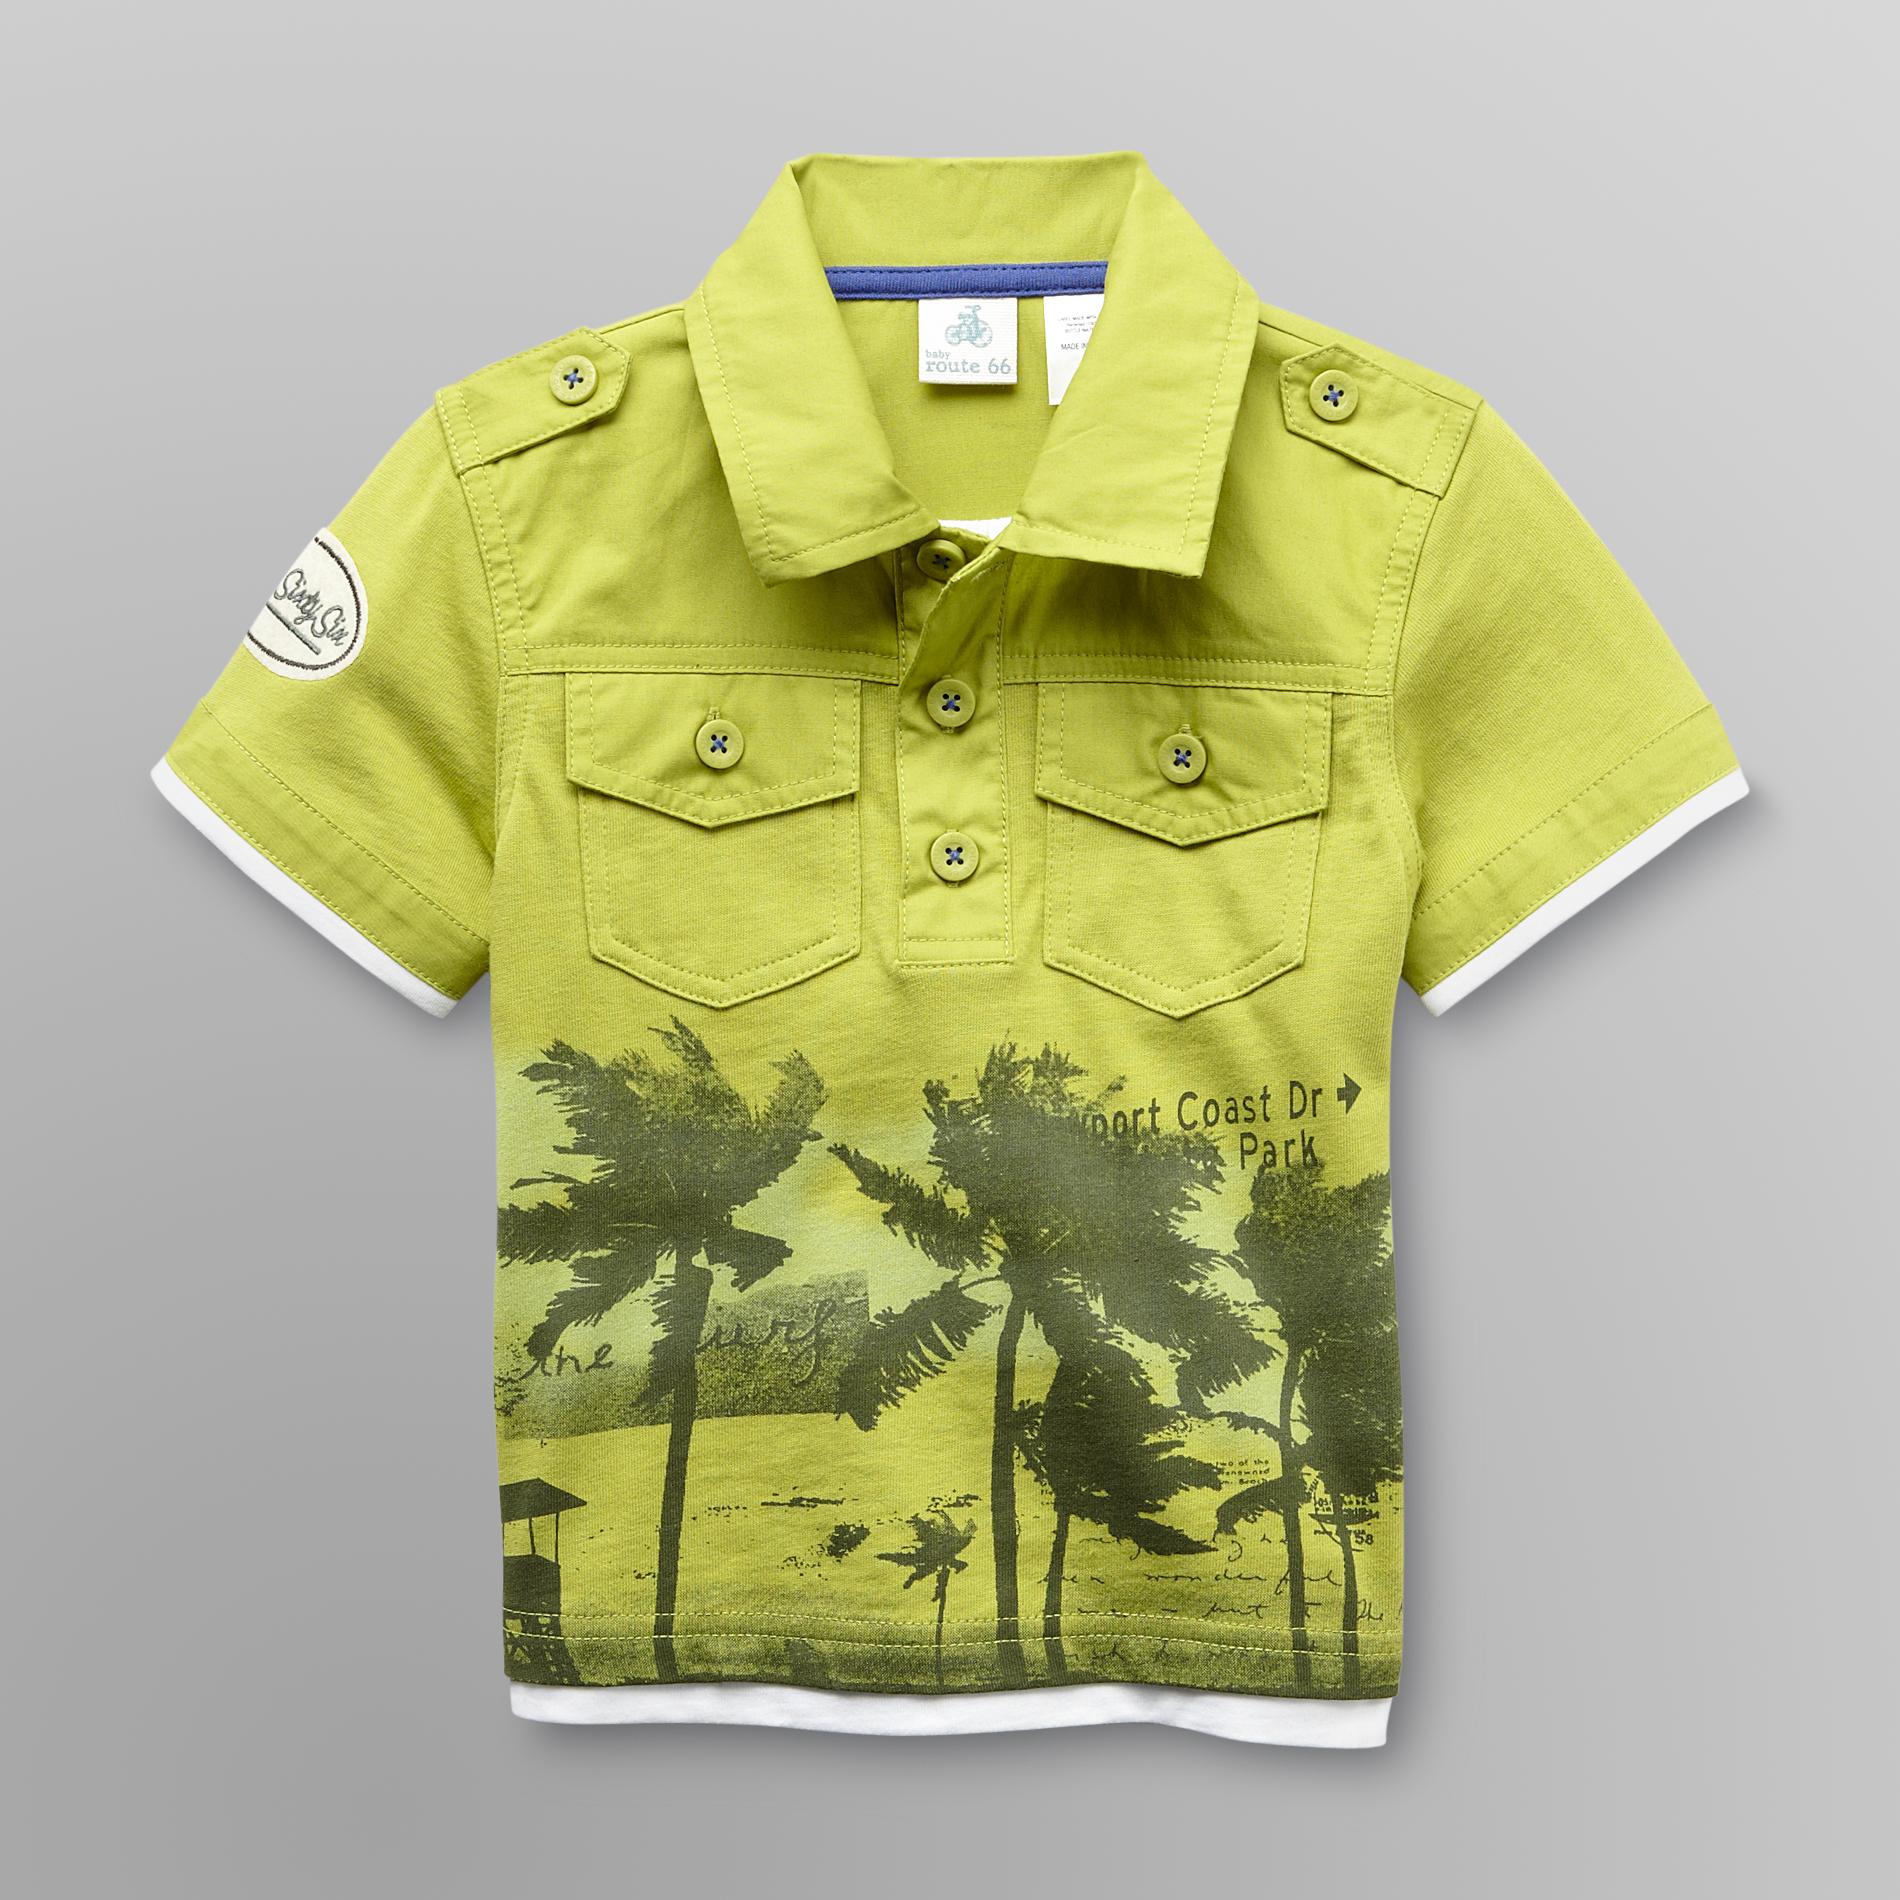 Route 66 Infant & Toddler Boy's Polo Shirt - The Surf